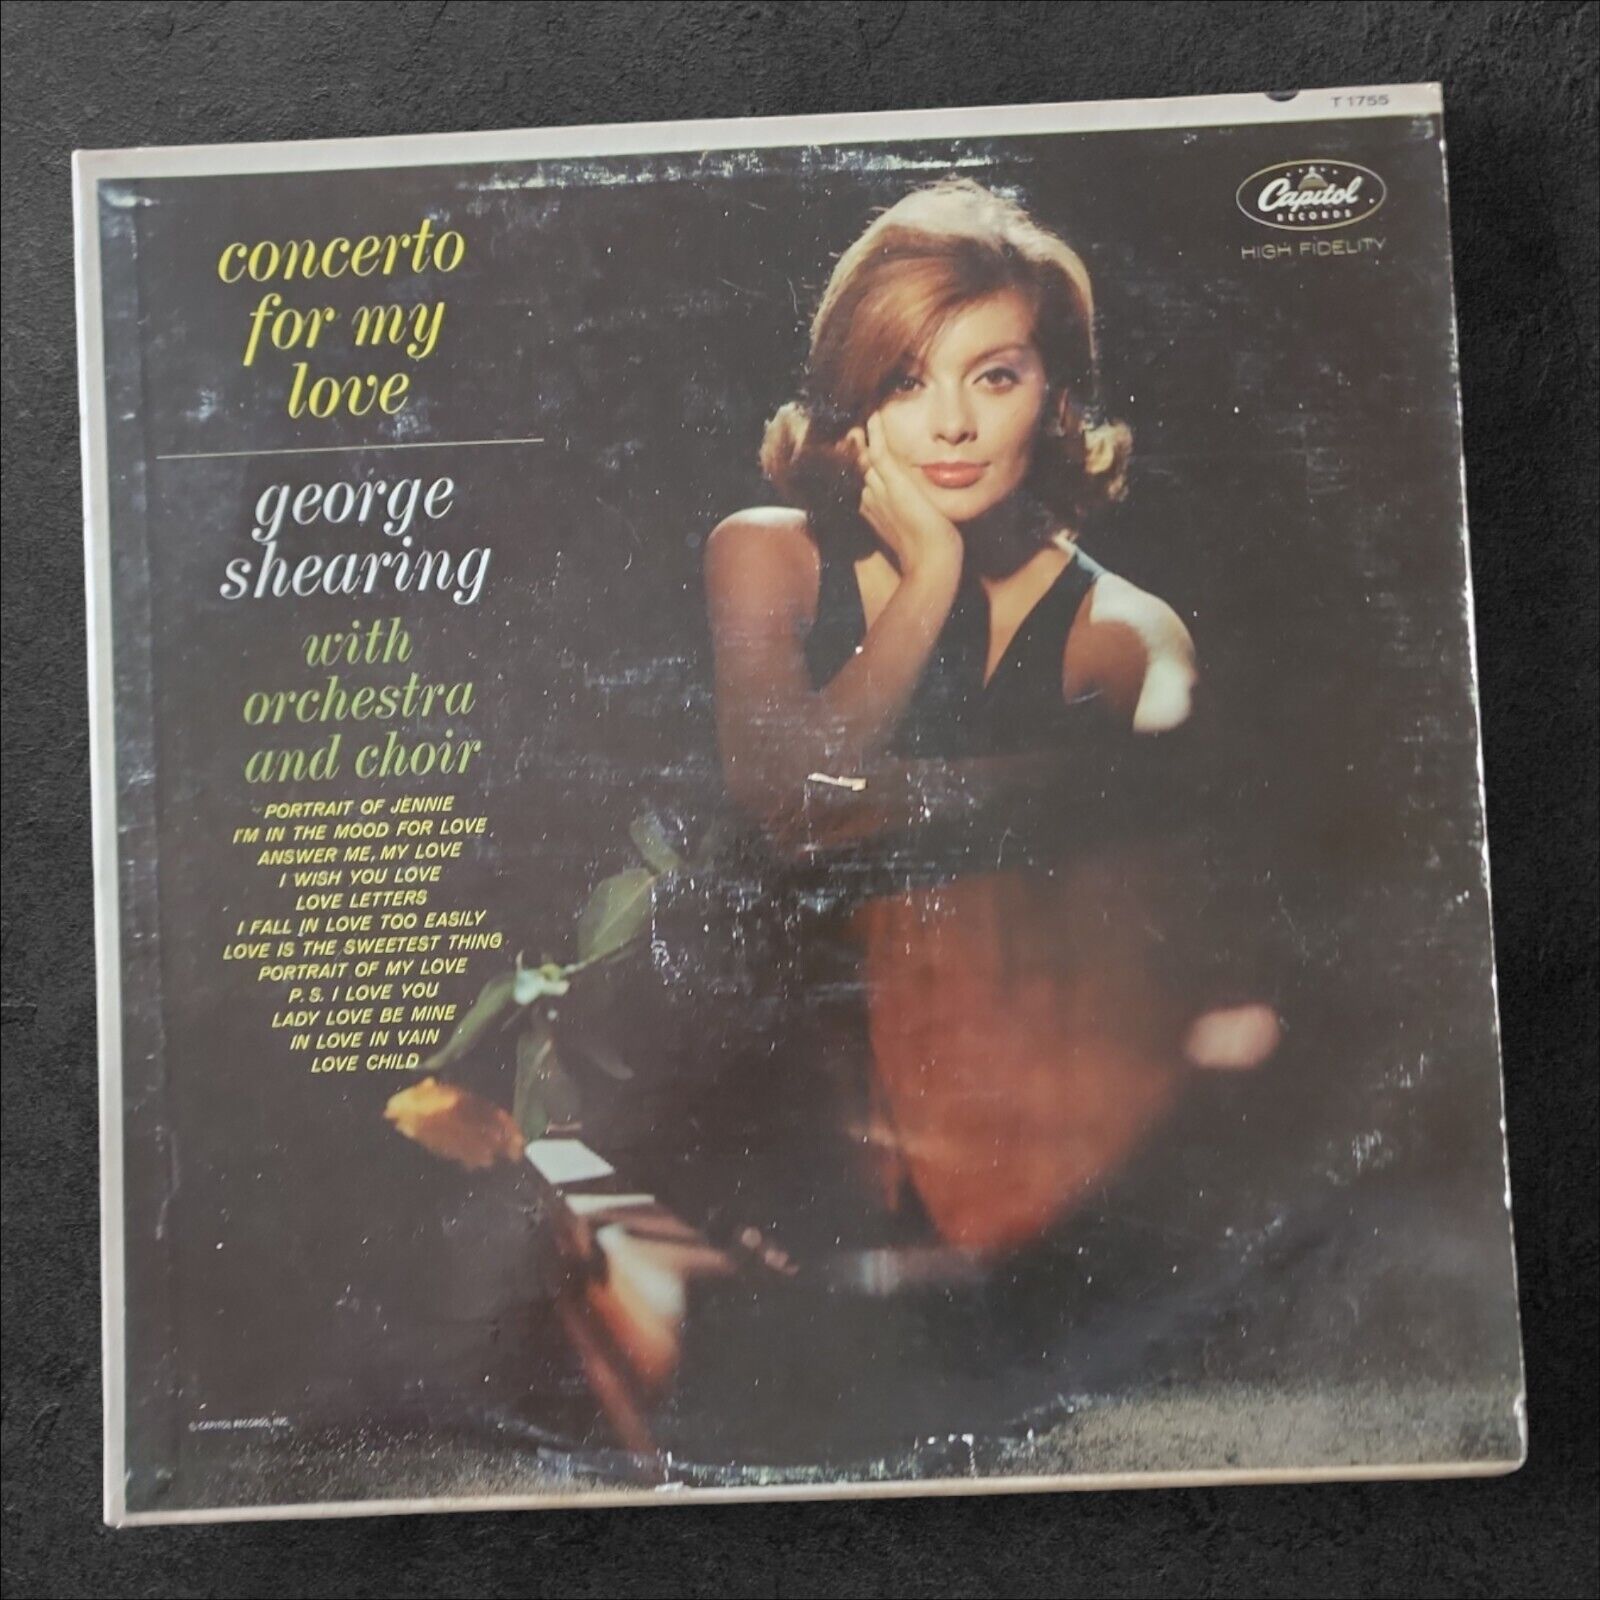 george shearing, concerto for my love, 33 rpm vinyl